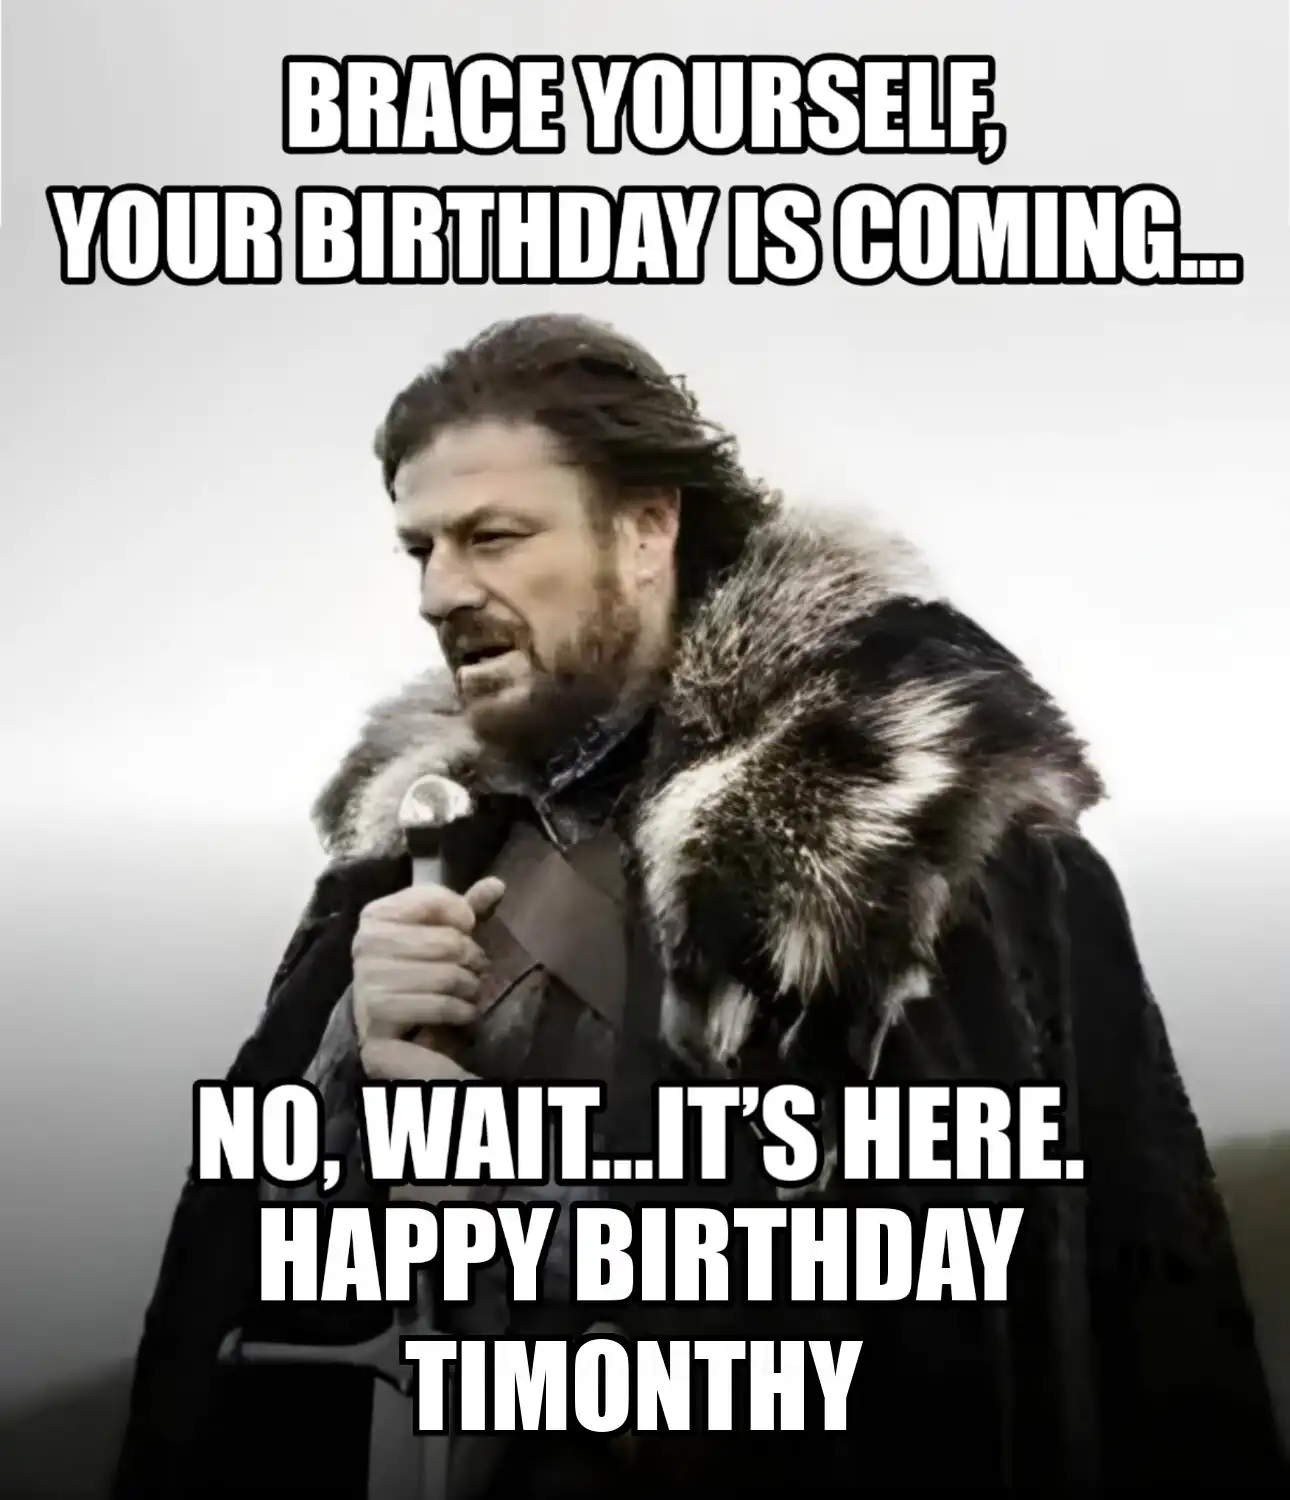 Happy Birthday Timonthy Brace Yourself Your Birthday Is Coming Meme